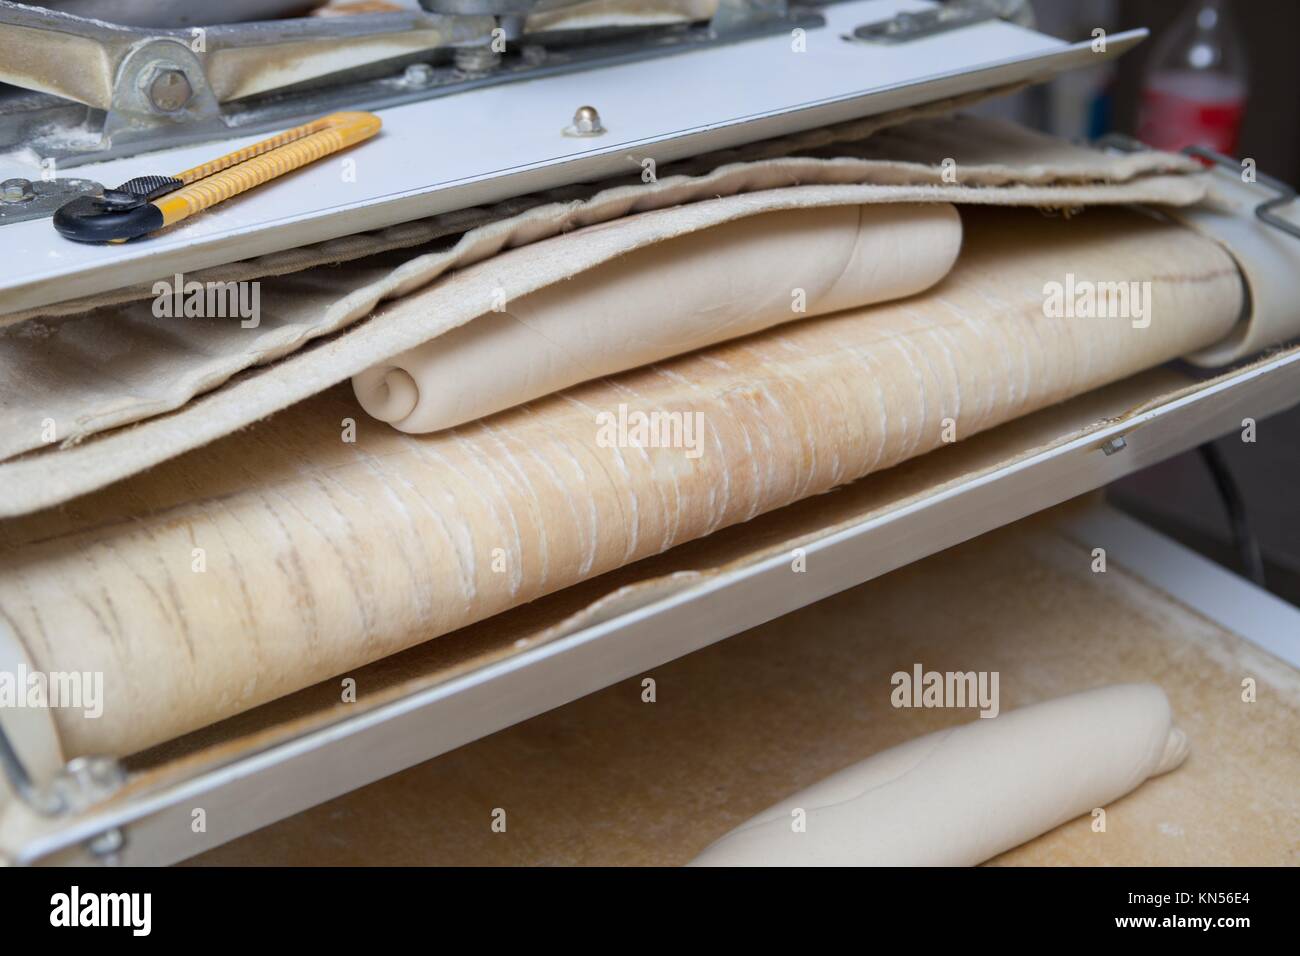 Dough divider and moulder machine at work. Manufacturing process of spanish bread. Stock Photo